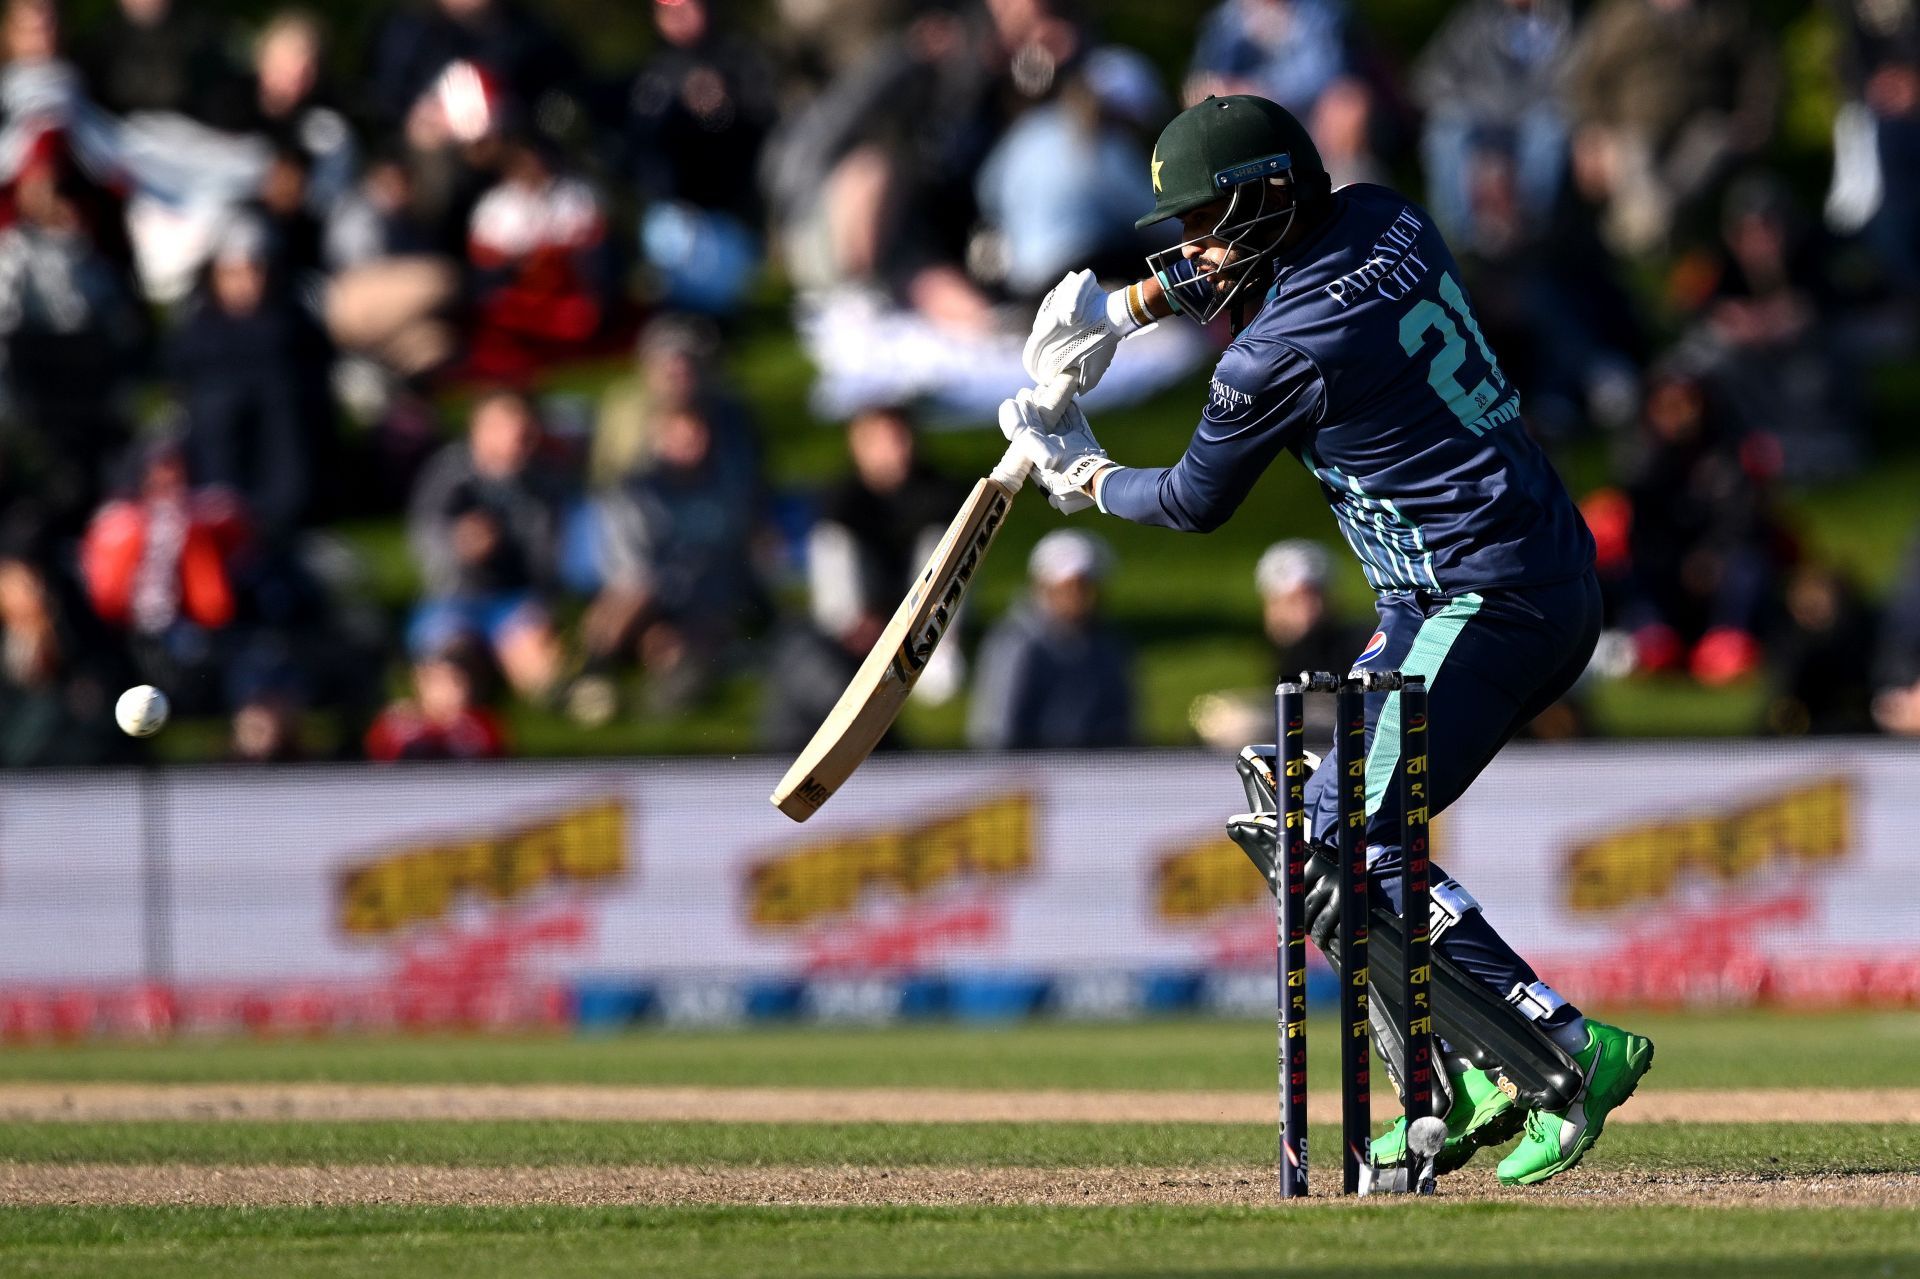 Mohammad Nawaz in action during the tri-nation series in New Zealand. (Credits: Getty)